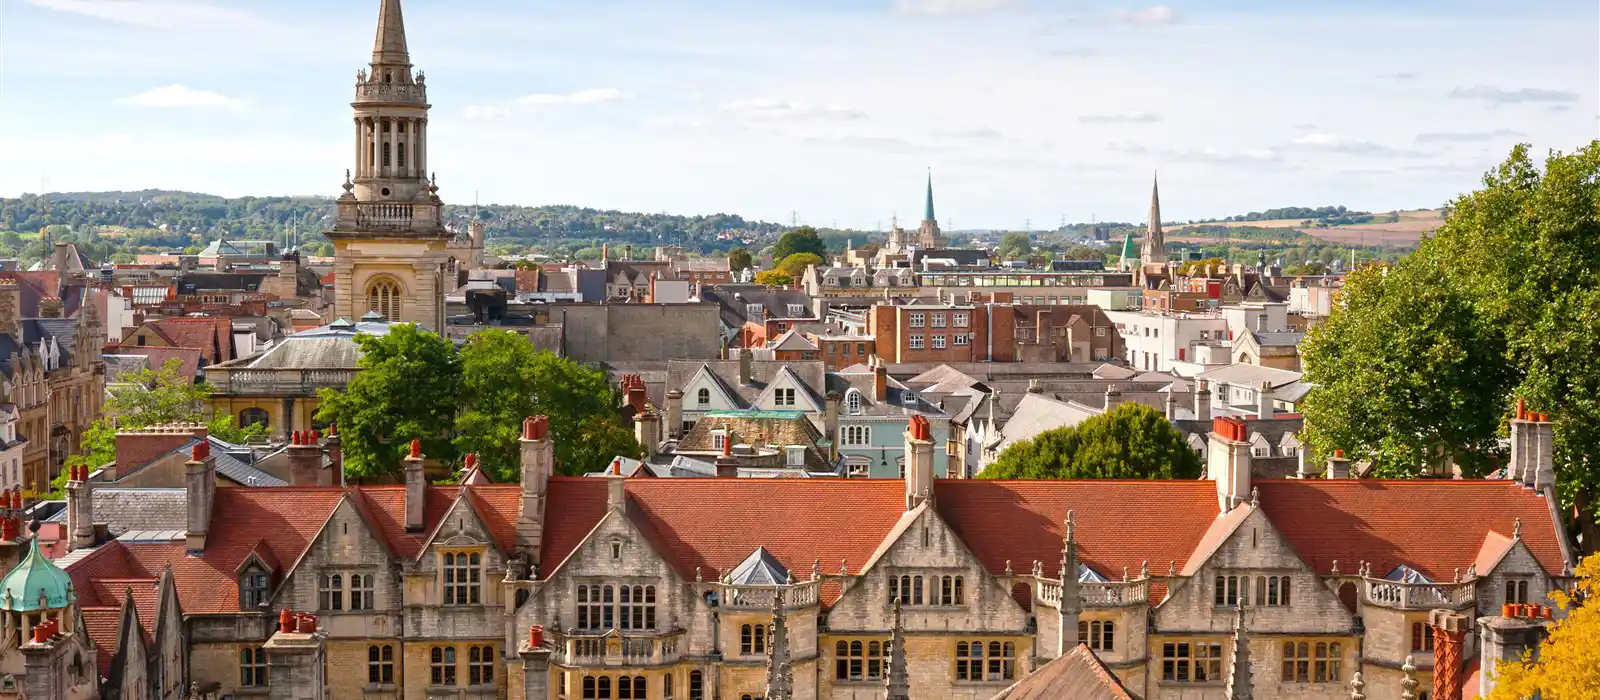 The City of Oxford hosts one of the UK's biggest literary festivals